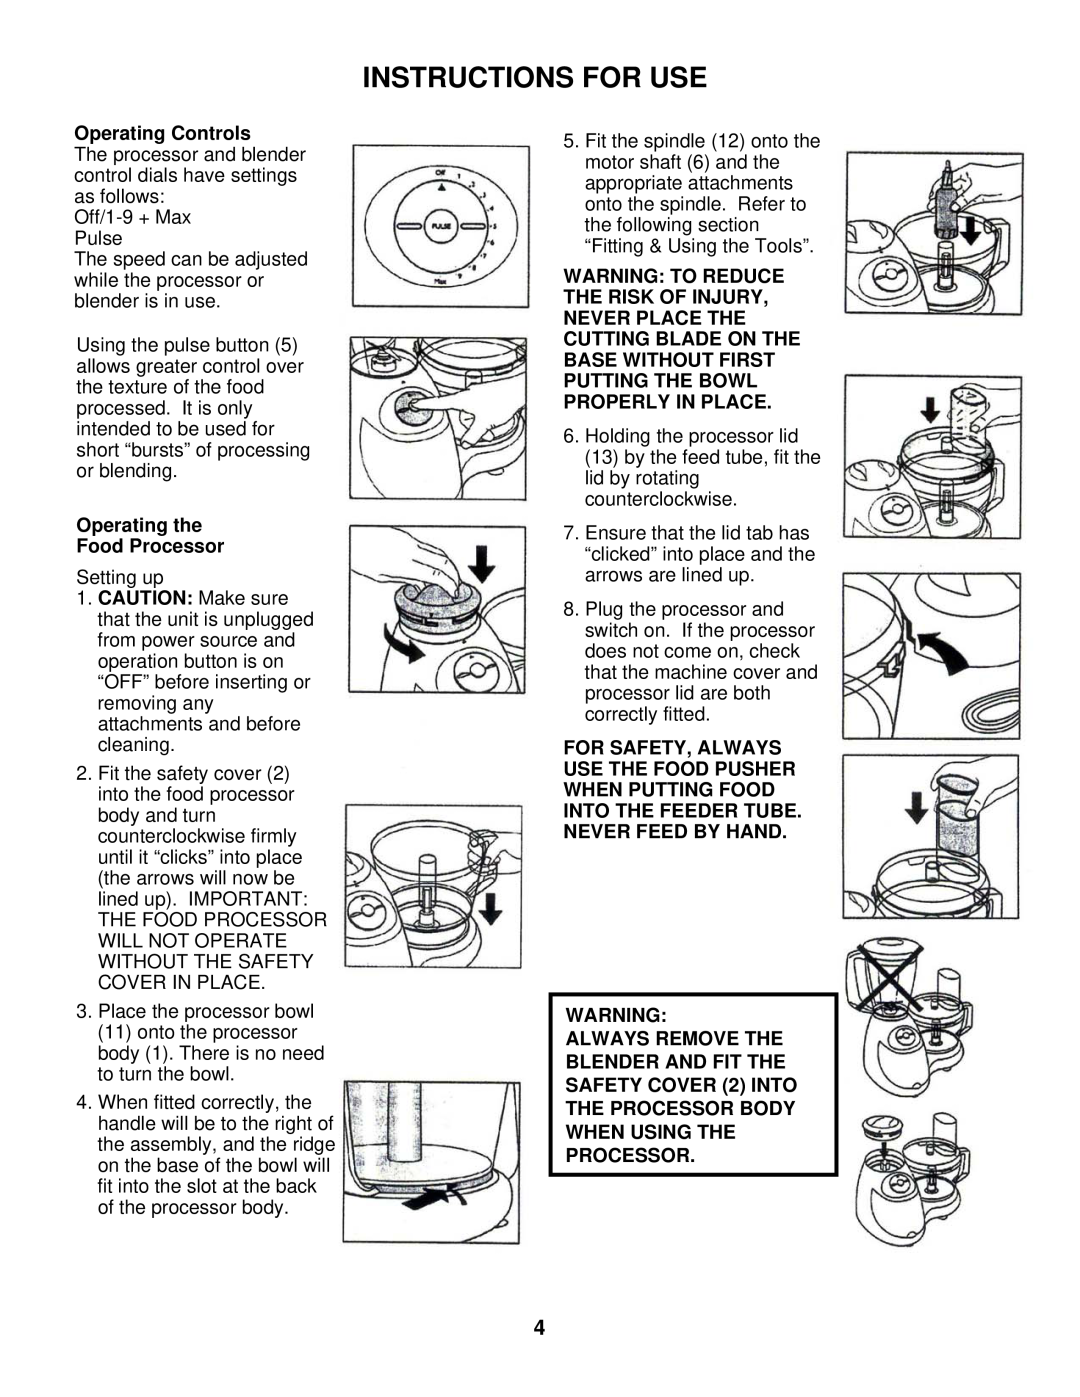 Bravetti BP100 instruction manual Instructions For Use 